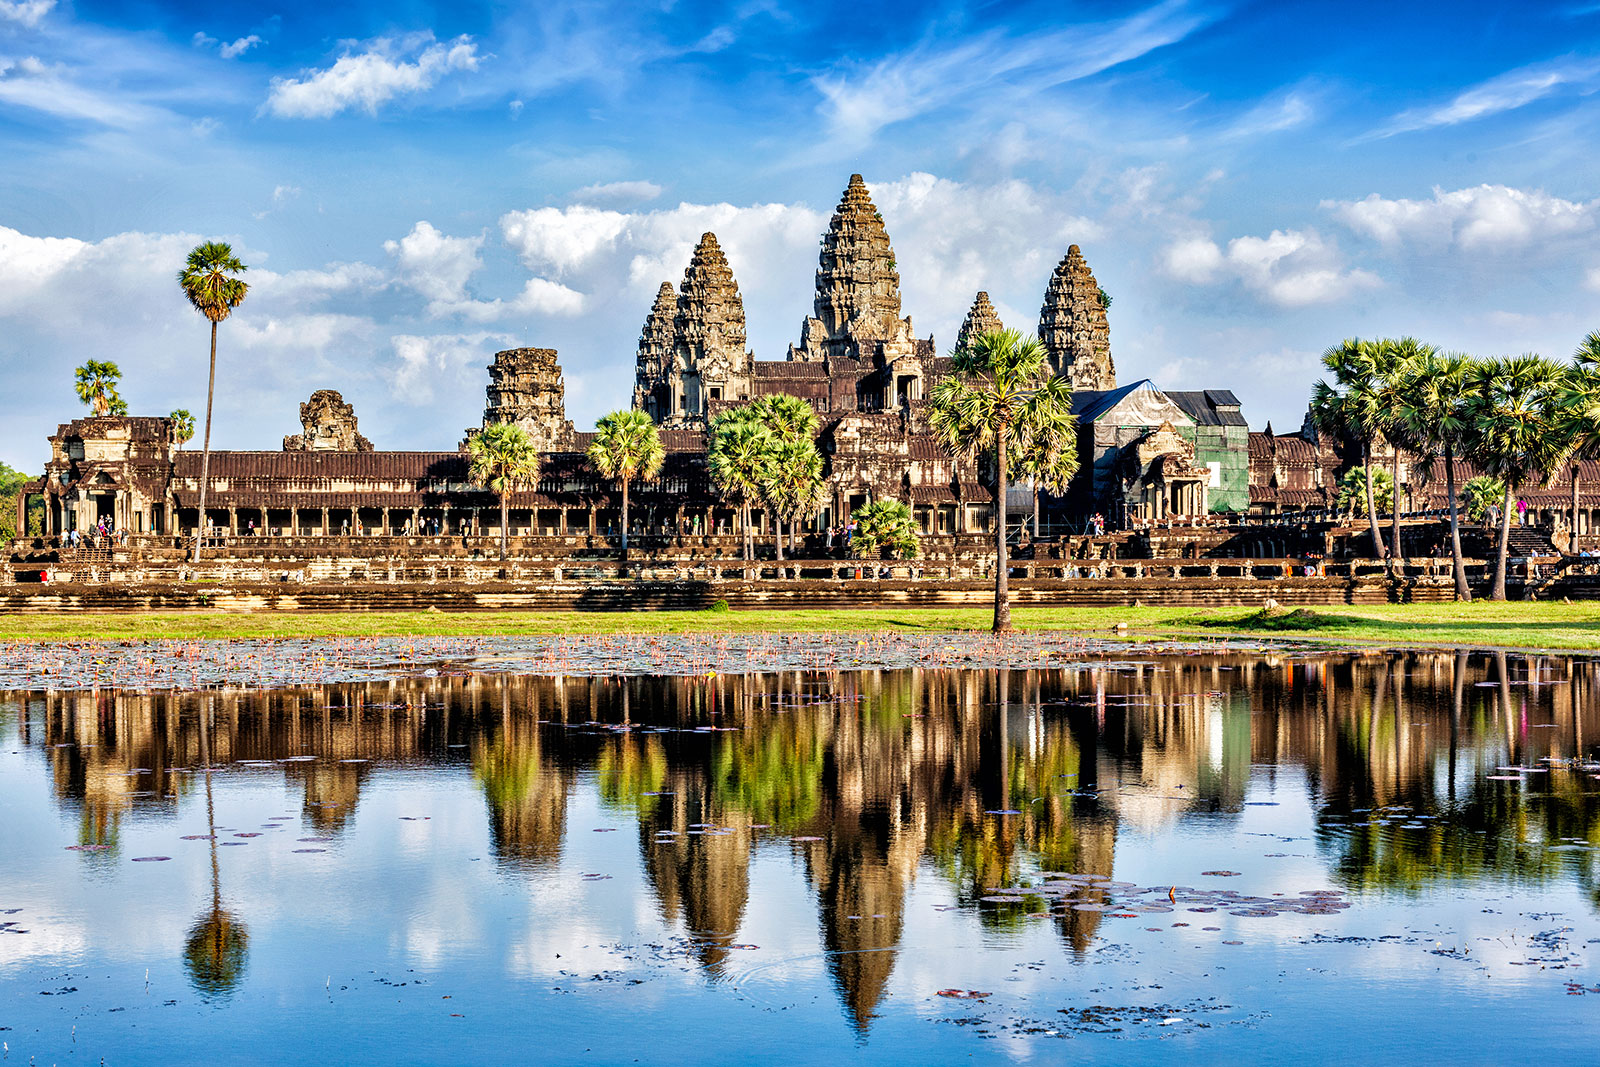 Can You Guess the Asian Country With Just Three Clues? Angkor Wat, Siem Reap, Cambodia